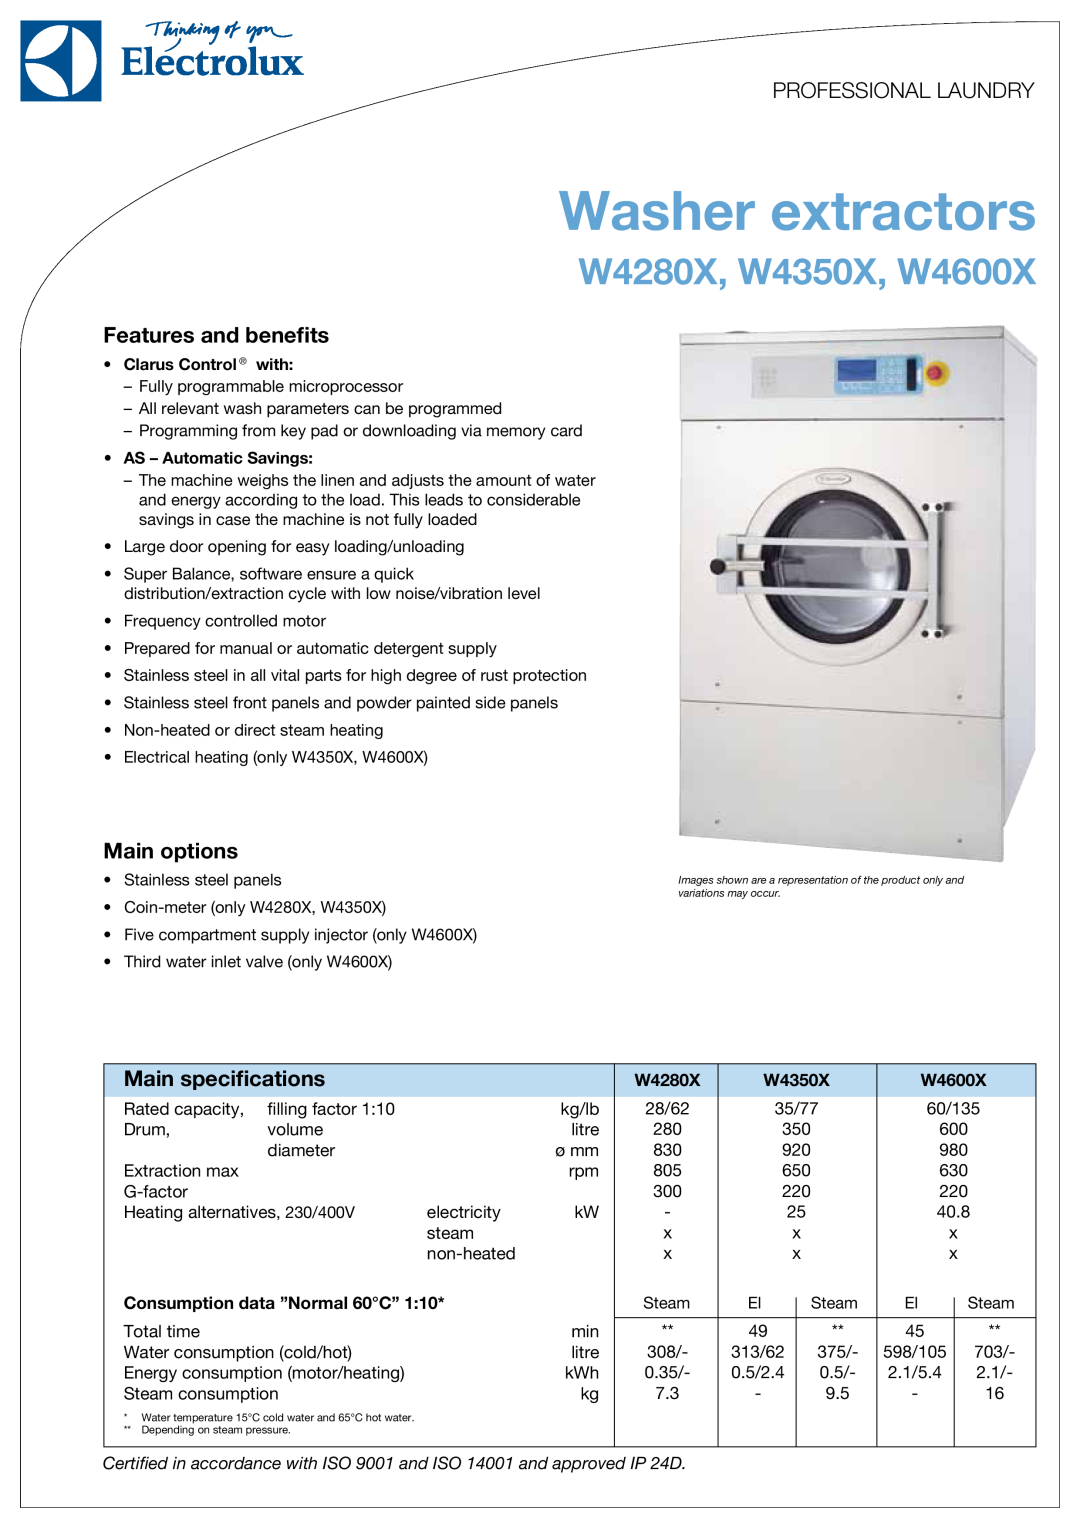 Electrolux specifications Washer extractors, W4280X, W4350X, W4600X, Professional Laundry, Features and benefits 